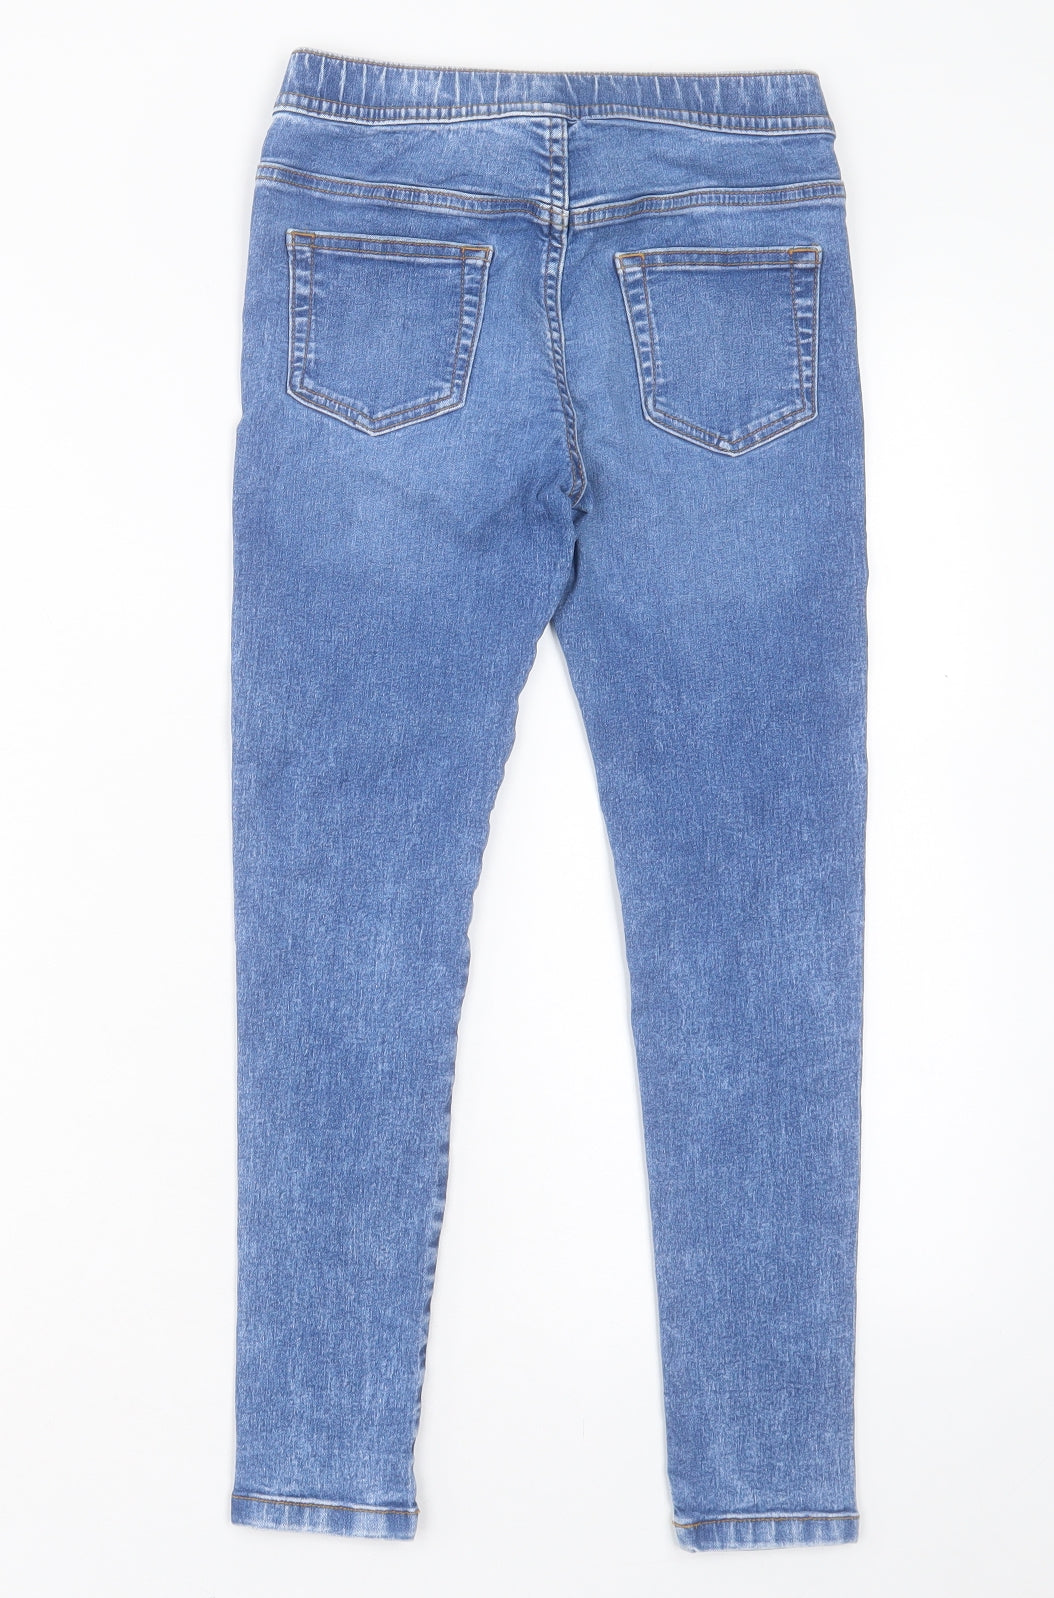 Marks and Spencer Girls Blue Cotton Skinny Jeans Size 10-11 Years Regular Button